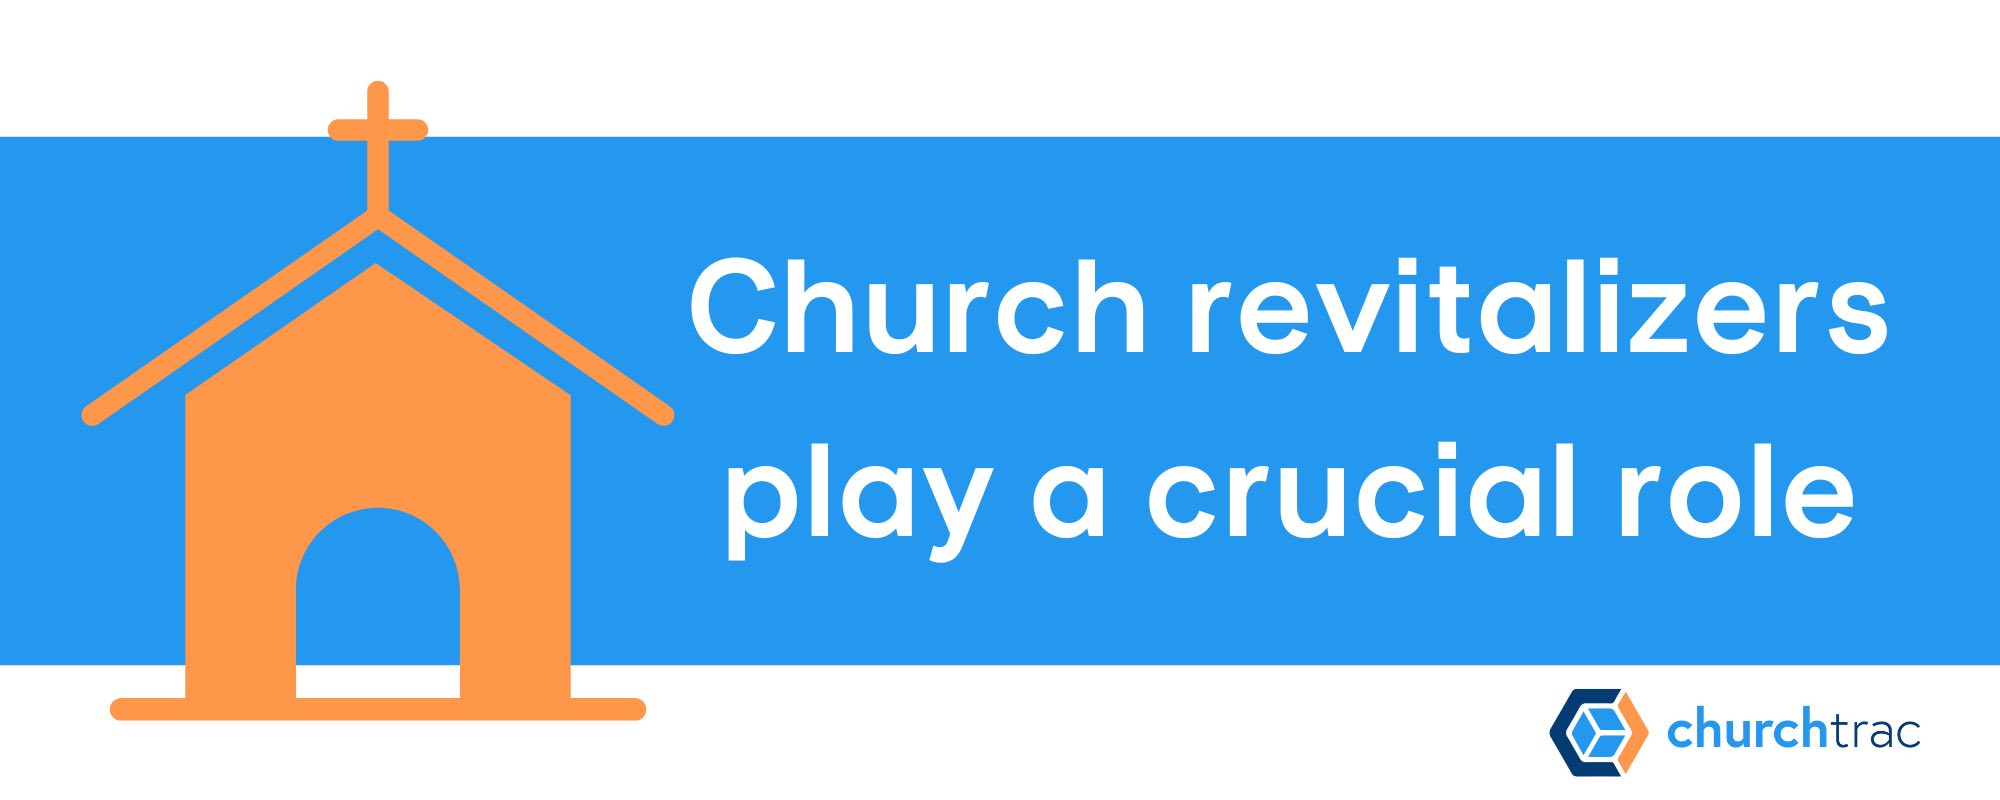 Church revitalizers play a crucial role in church growth